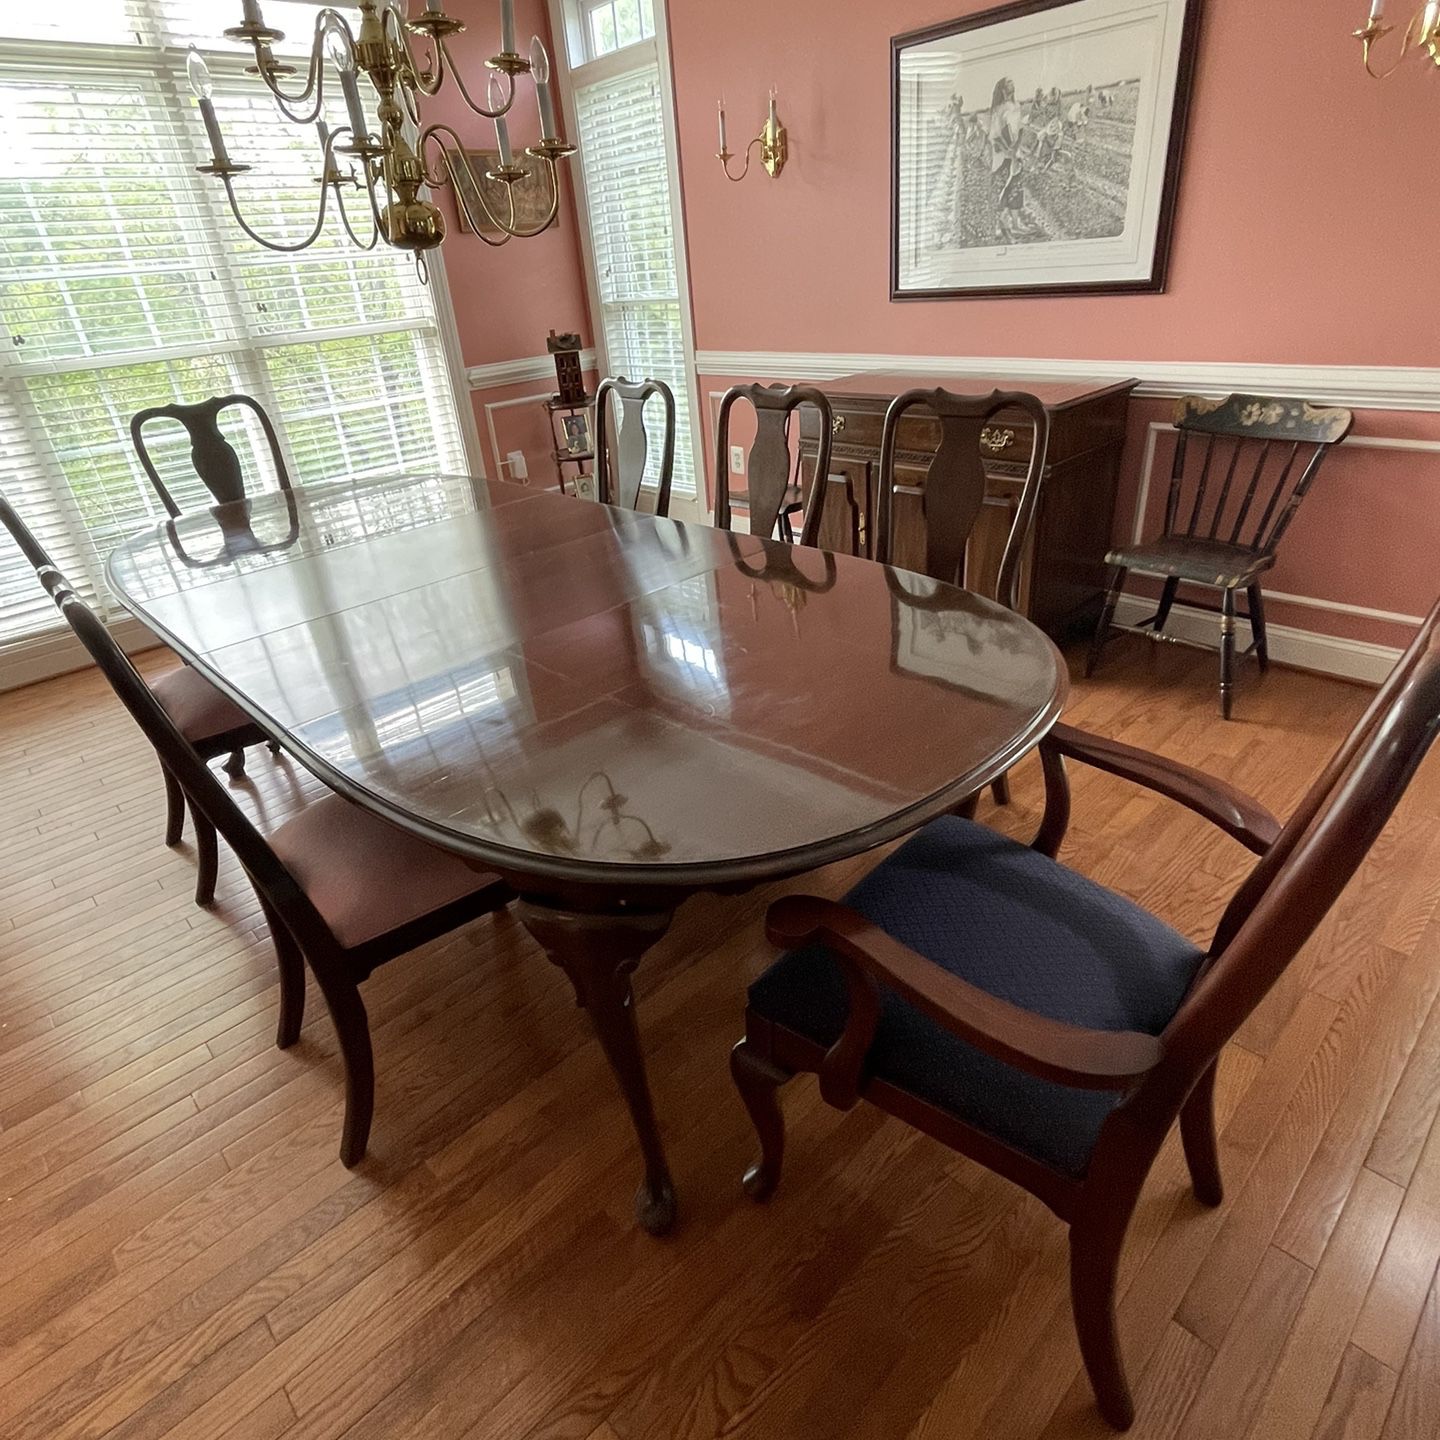 Ethan Allen cherry dining room set, includes server and lighted cupboard too